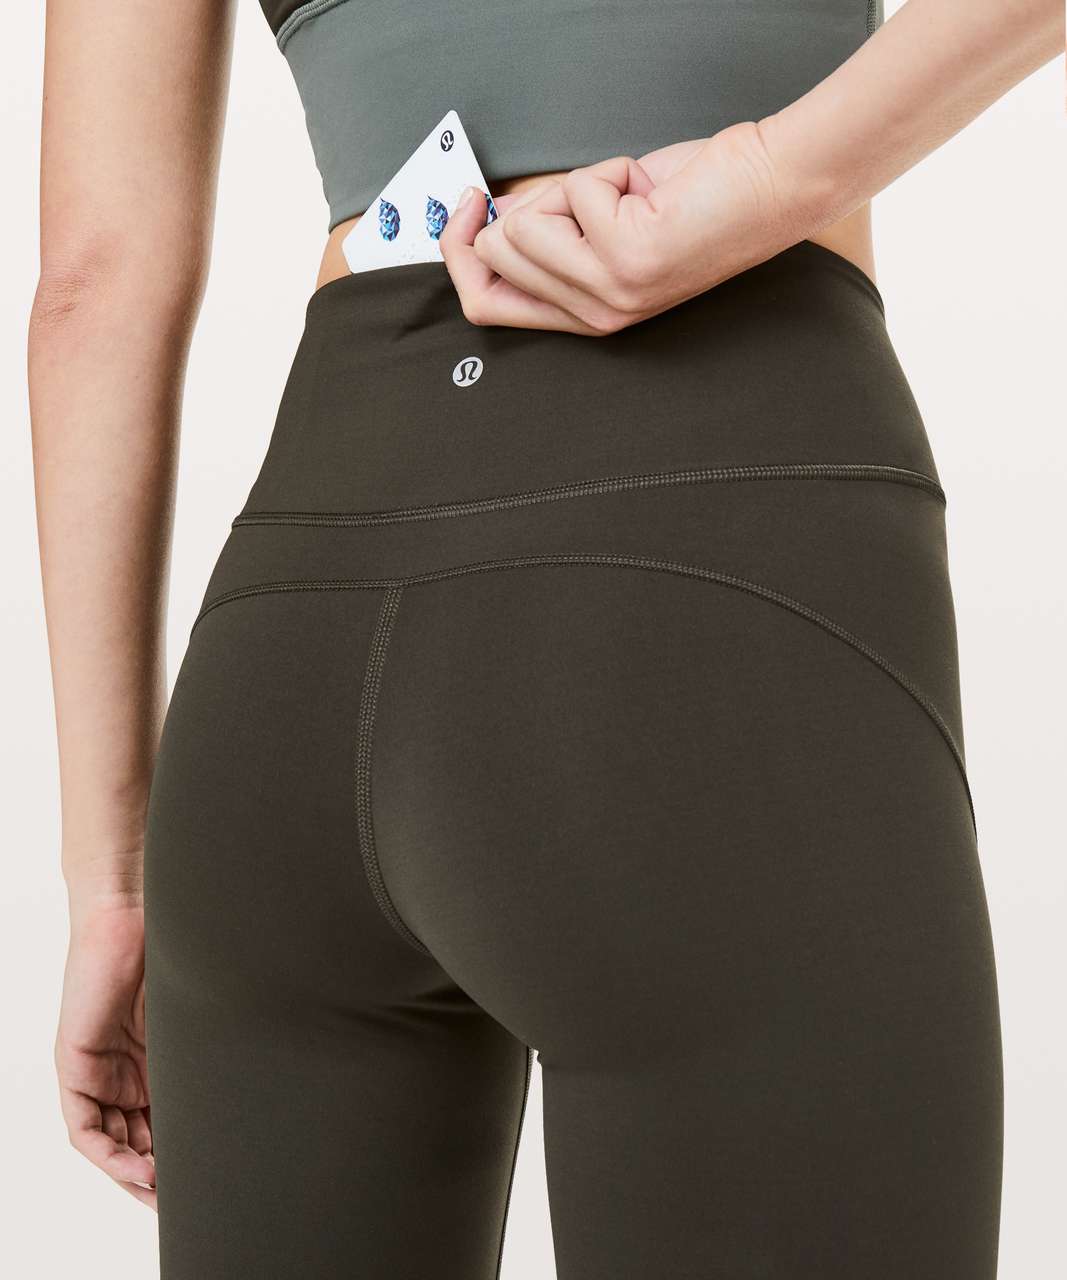 Lululemon In Movement 7/8 Tight *Everlux 25" - Dark Olive (First Release)